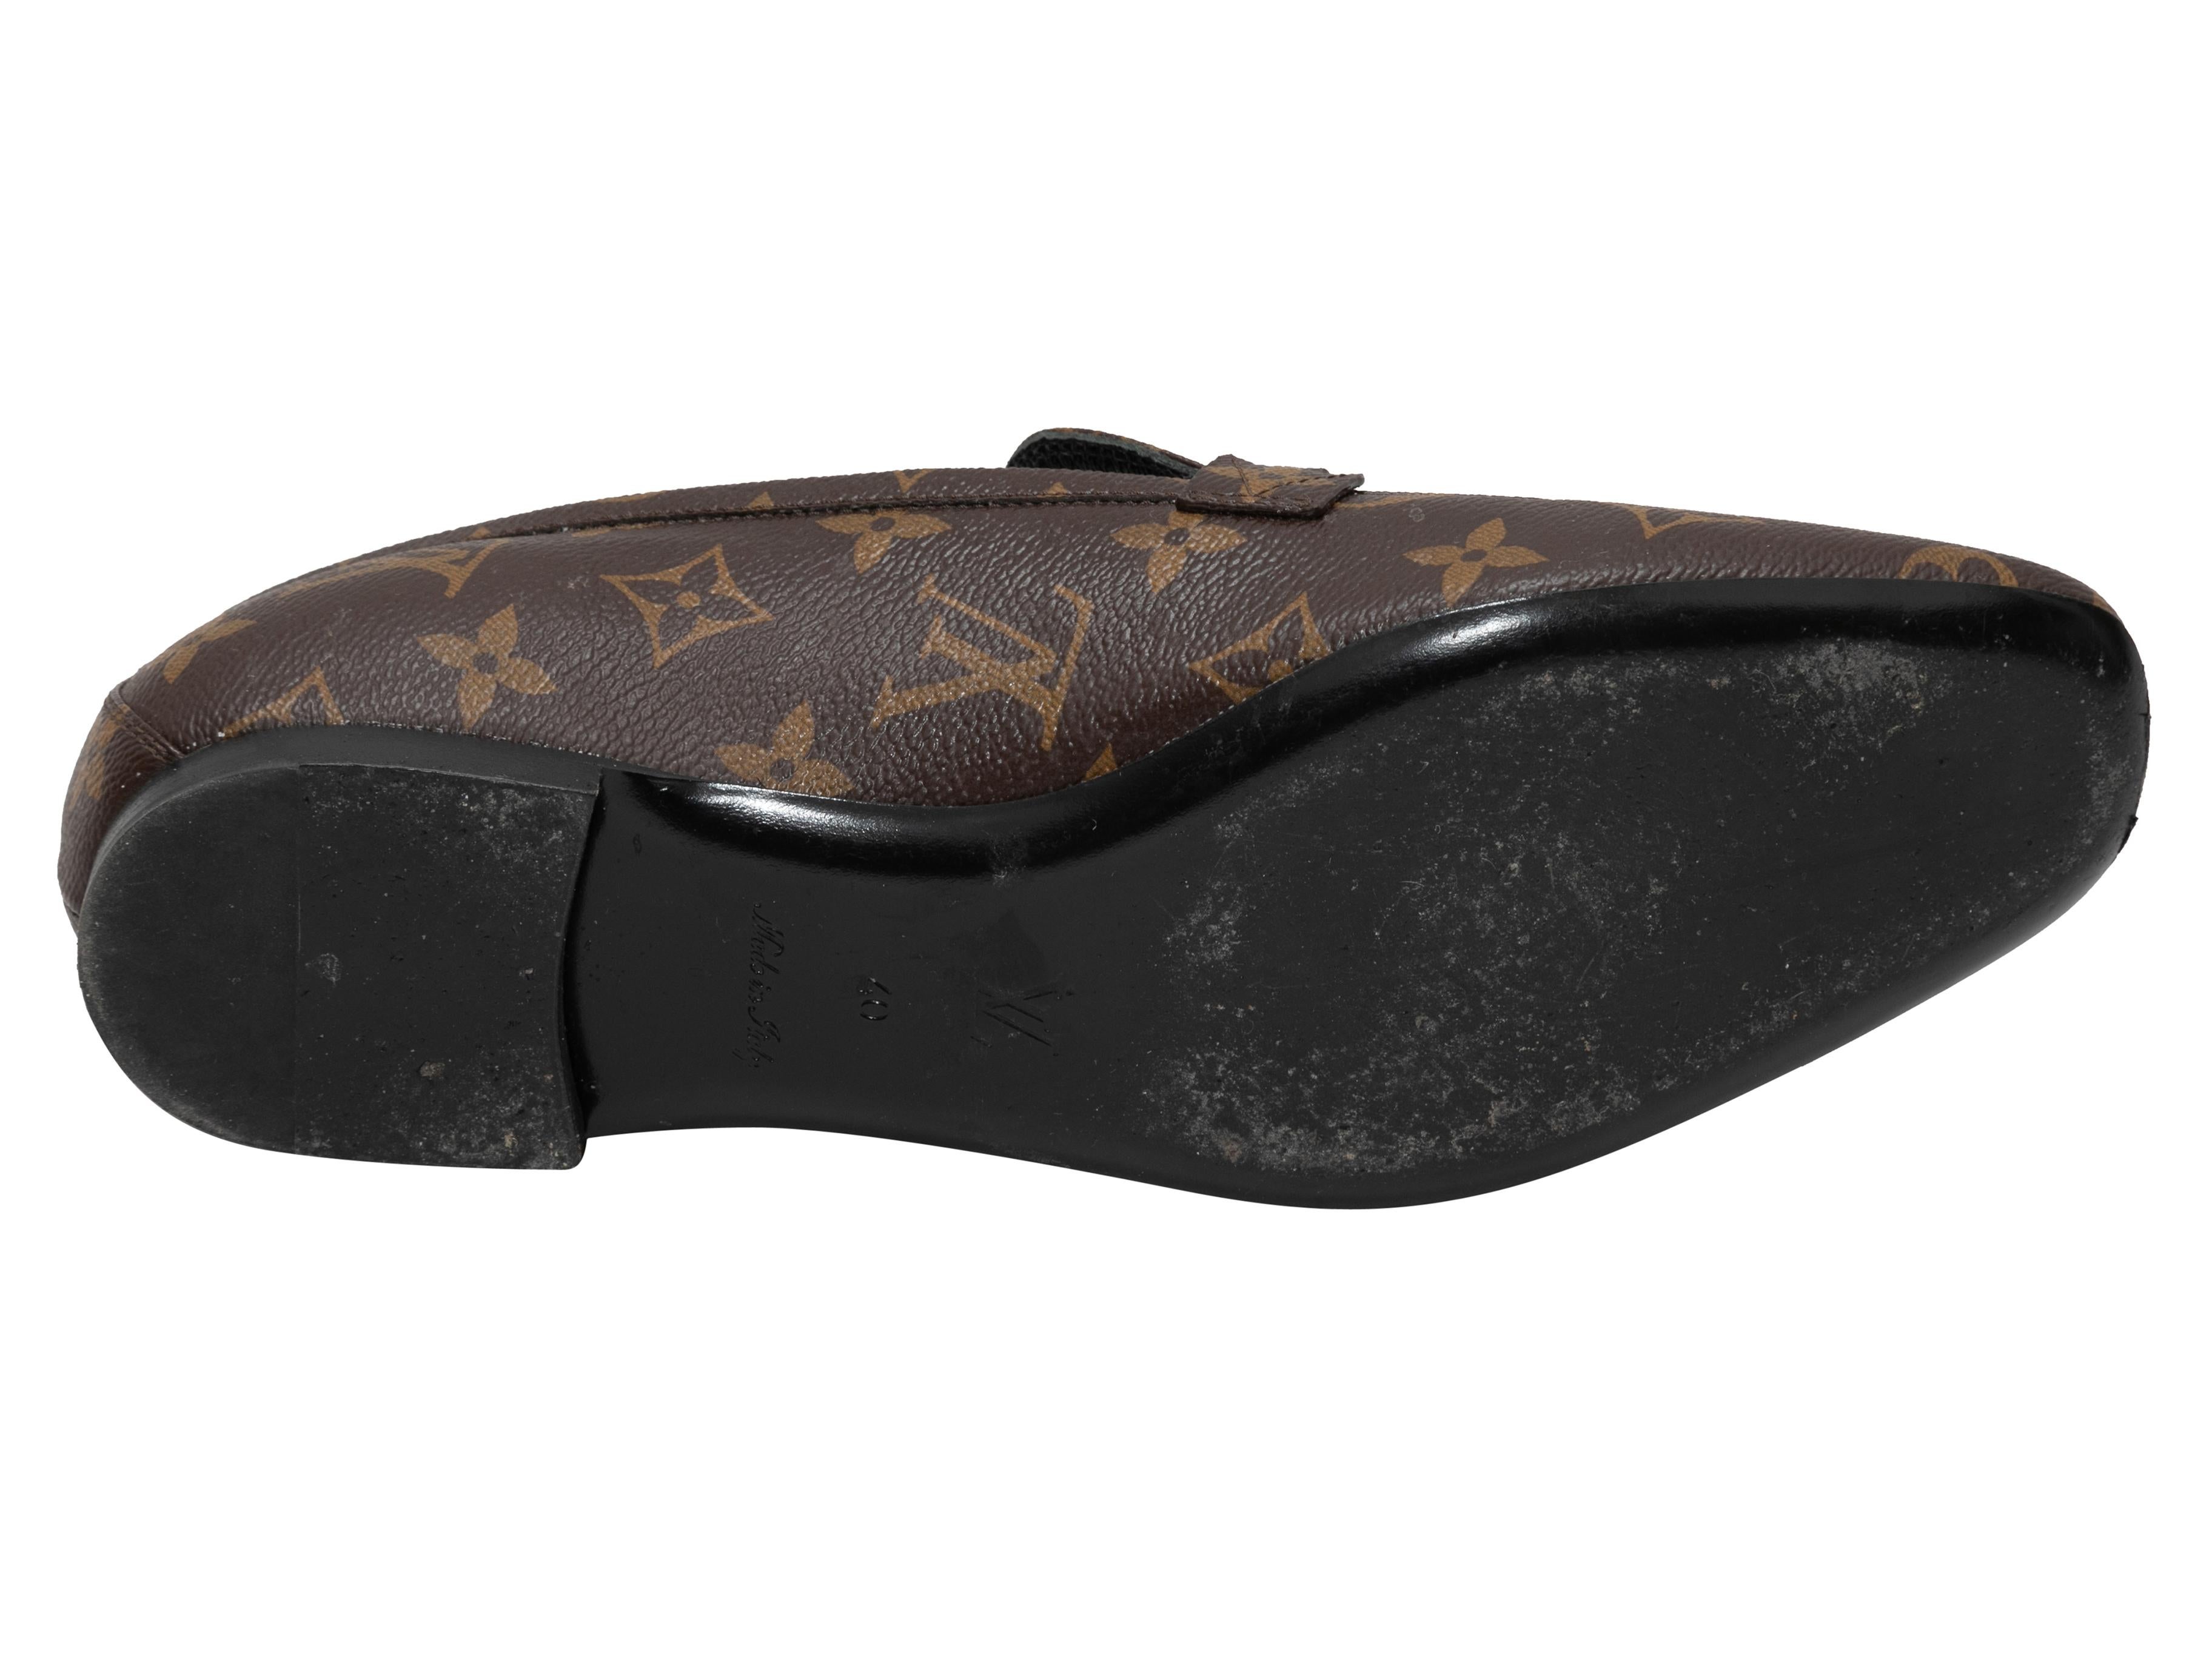 Brown monogram coated canvas Upper Case loafers by Louis Vuitton. Gold-tone hardware.